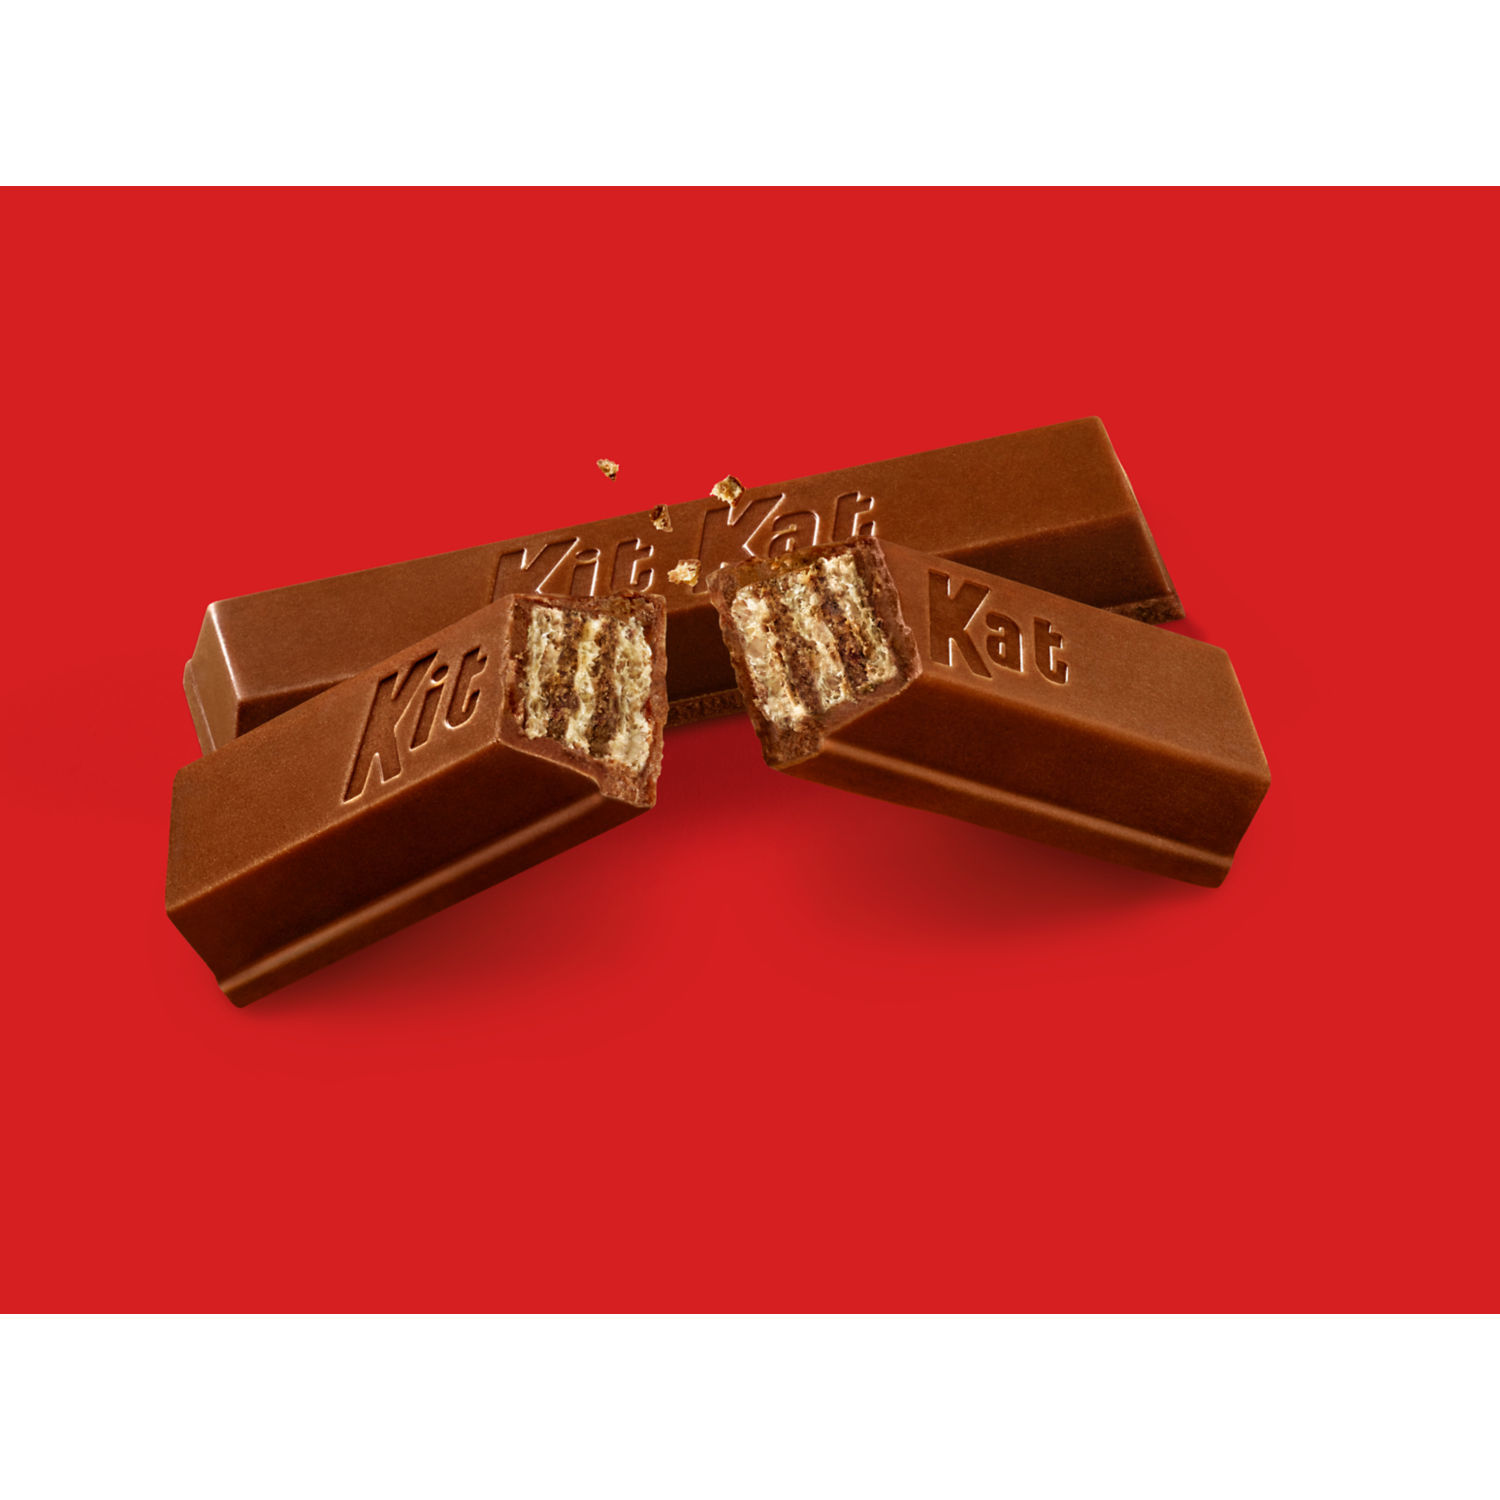 Kit Kat® Milk Chocolate Wafer Snack Size Candy, Bag 32.34 oz, 66 Pieces - image 4 of 9